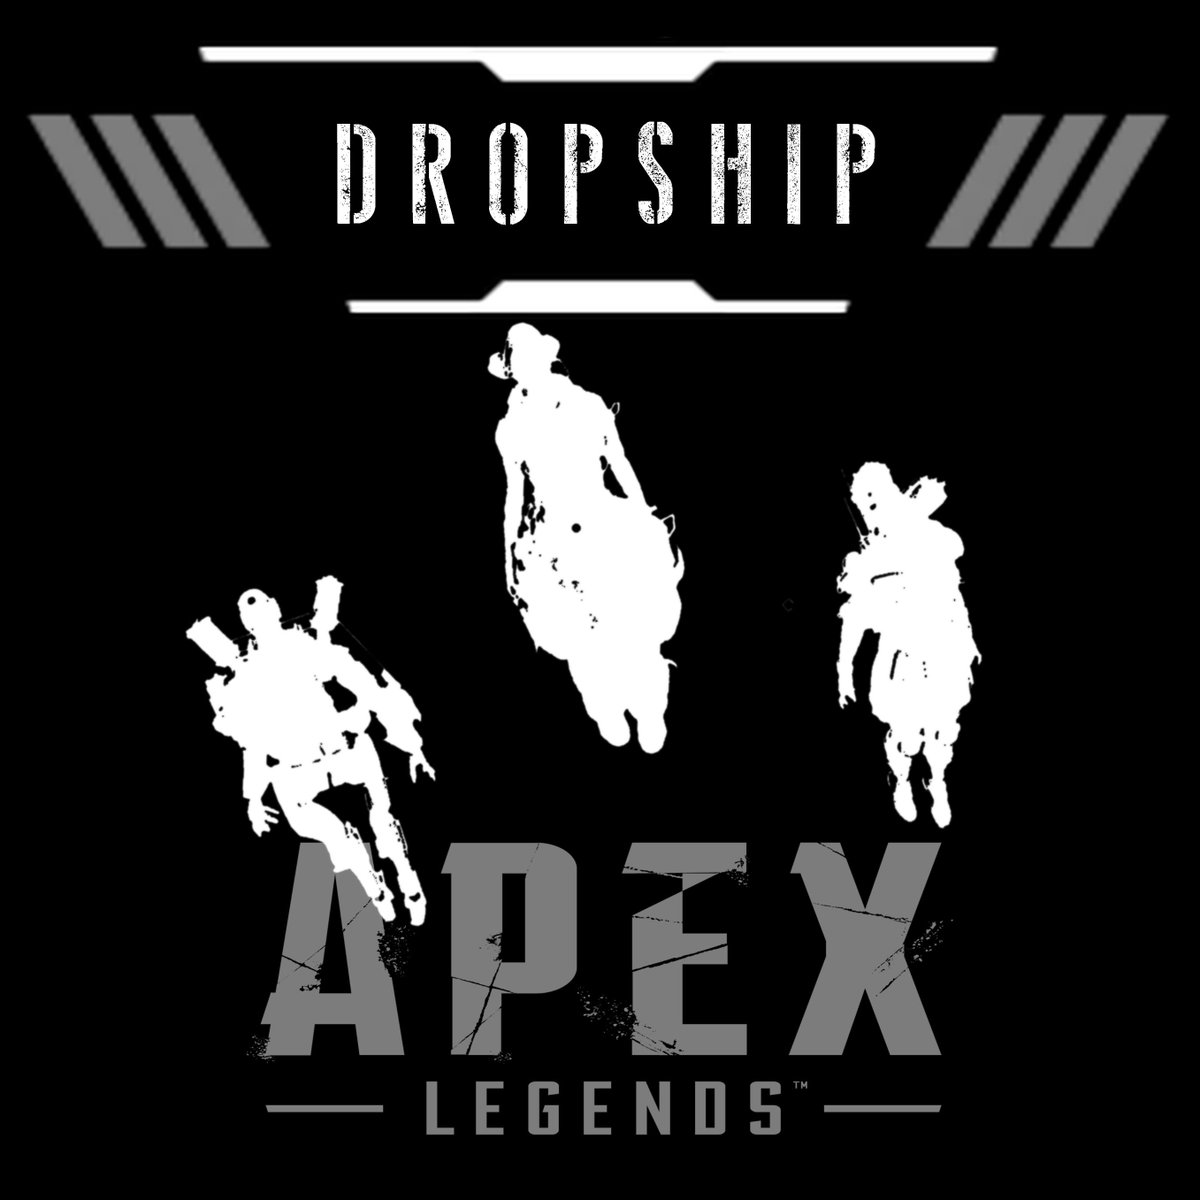 Check out this weeks Gun Guide on our Apex Legends Podcast: The Dropship! Me and Essdii go deep on loadouts and weapon balance.
thebattlebrothers.org/dropship-apex-…
#ApexLegends #ApexLegendsPodcast #ApexShow #ApexPodcast #gunguide